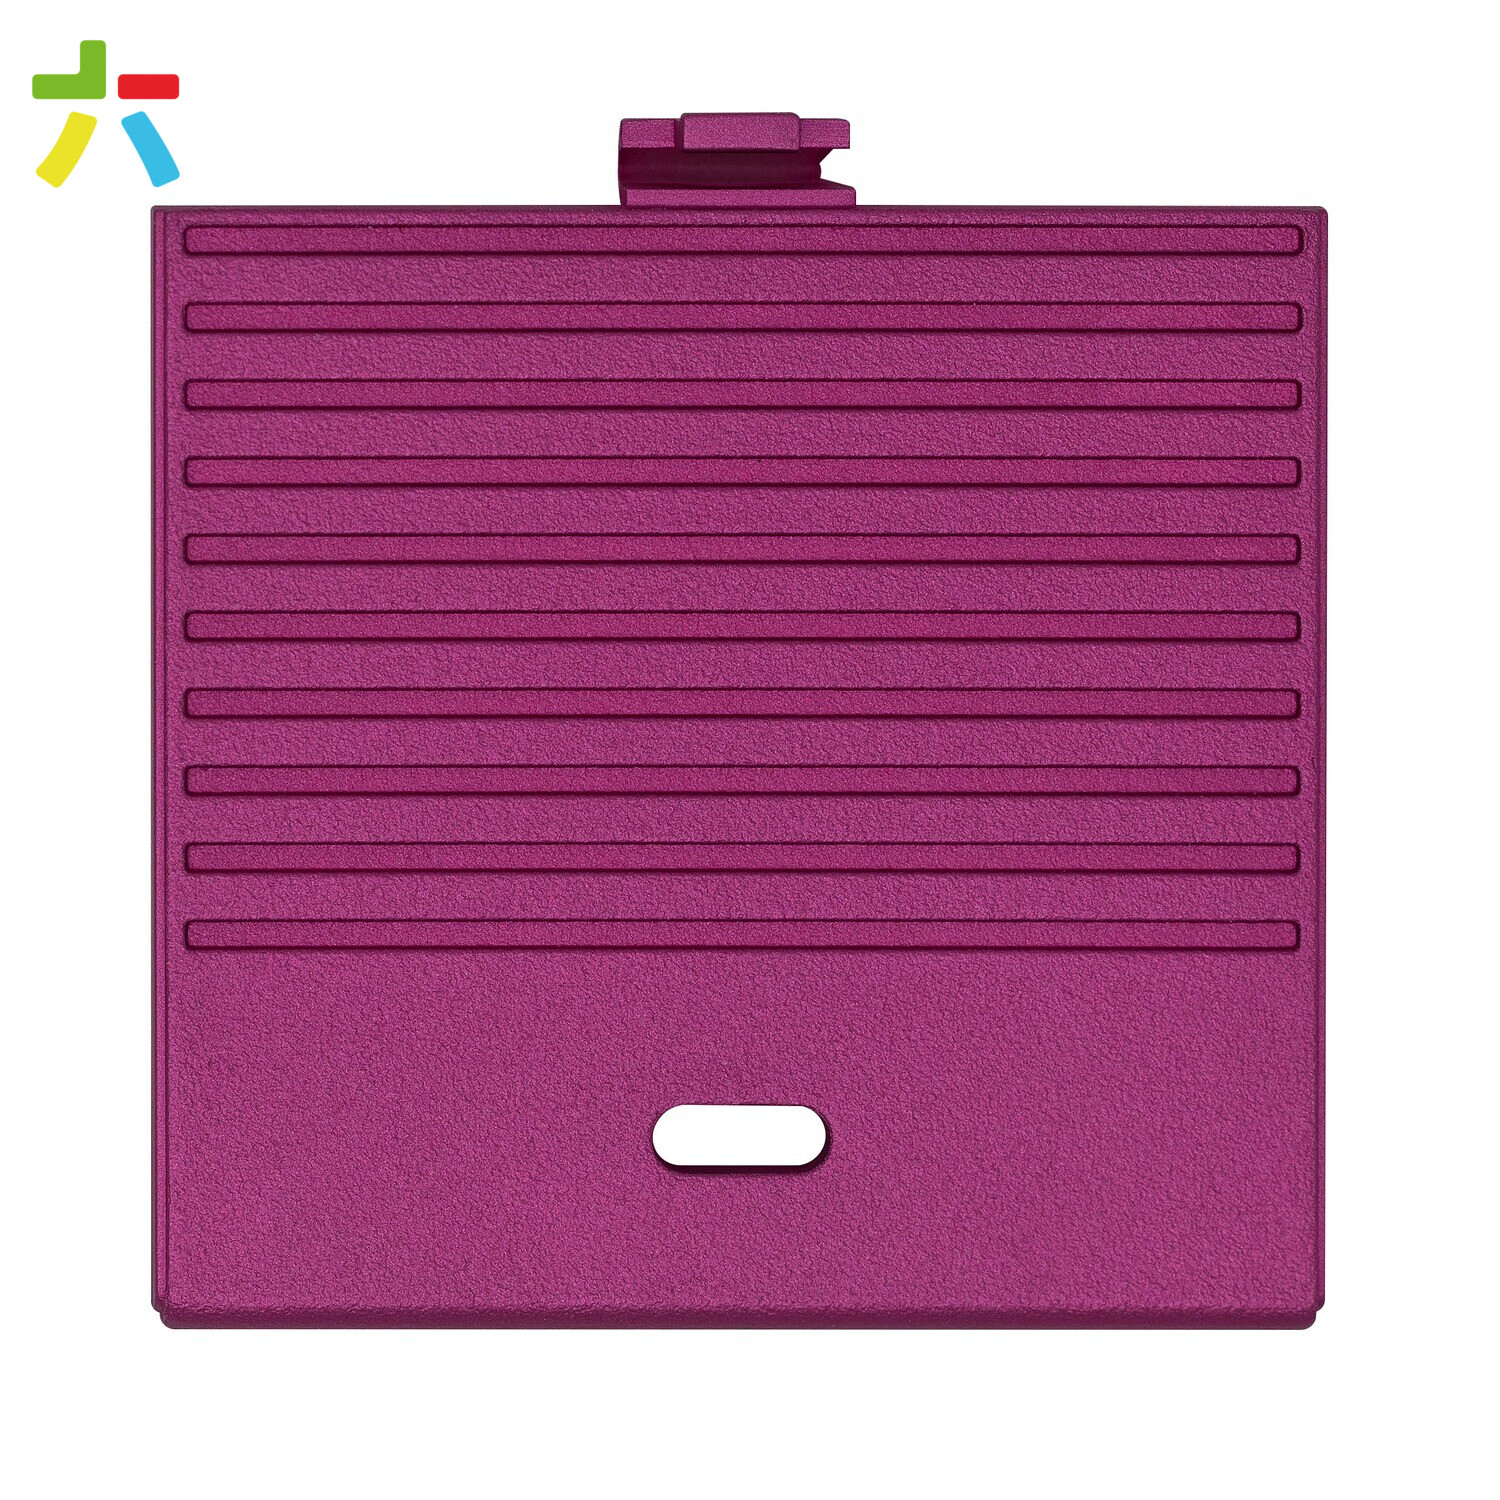 Game Boy Original USB-C Battery Cover (Pink Purple - Soft Touch)